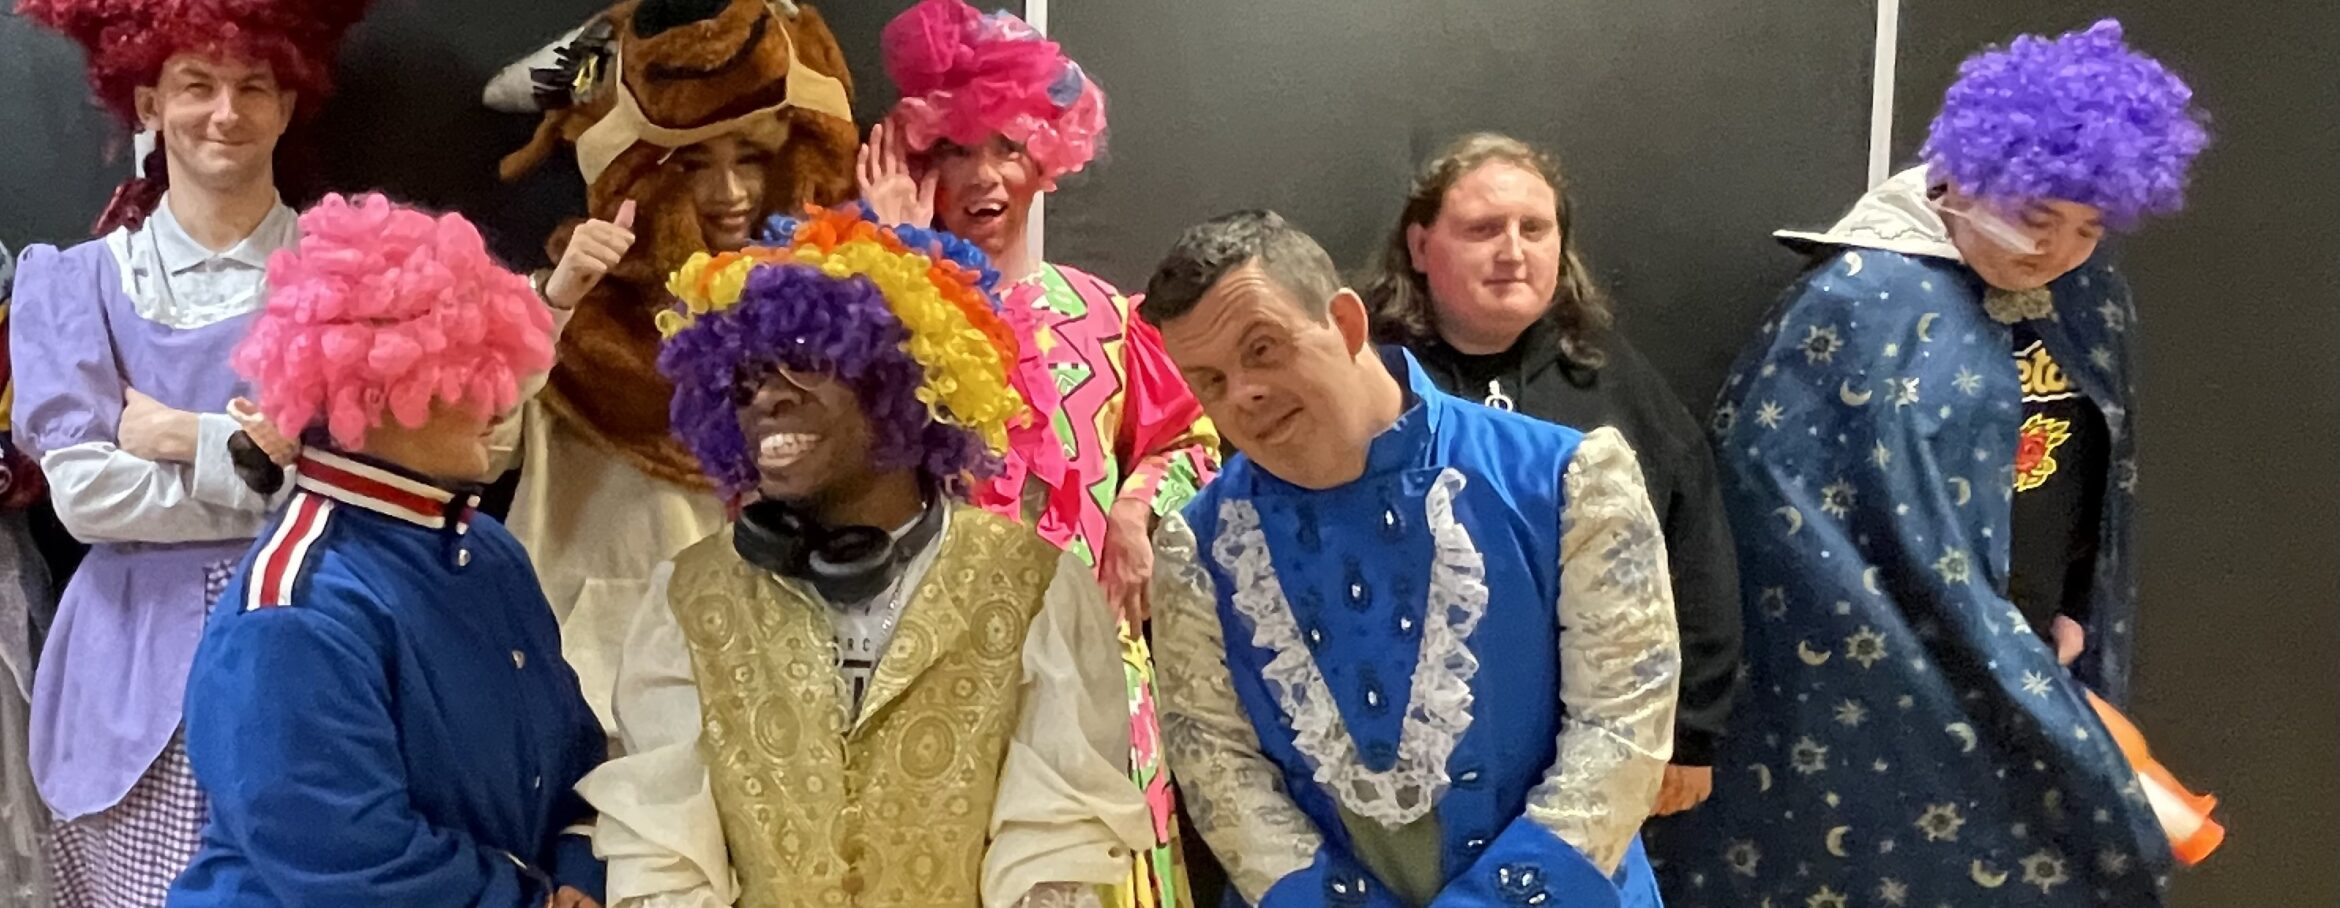 A group of members are dressed up in pantomime costumes